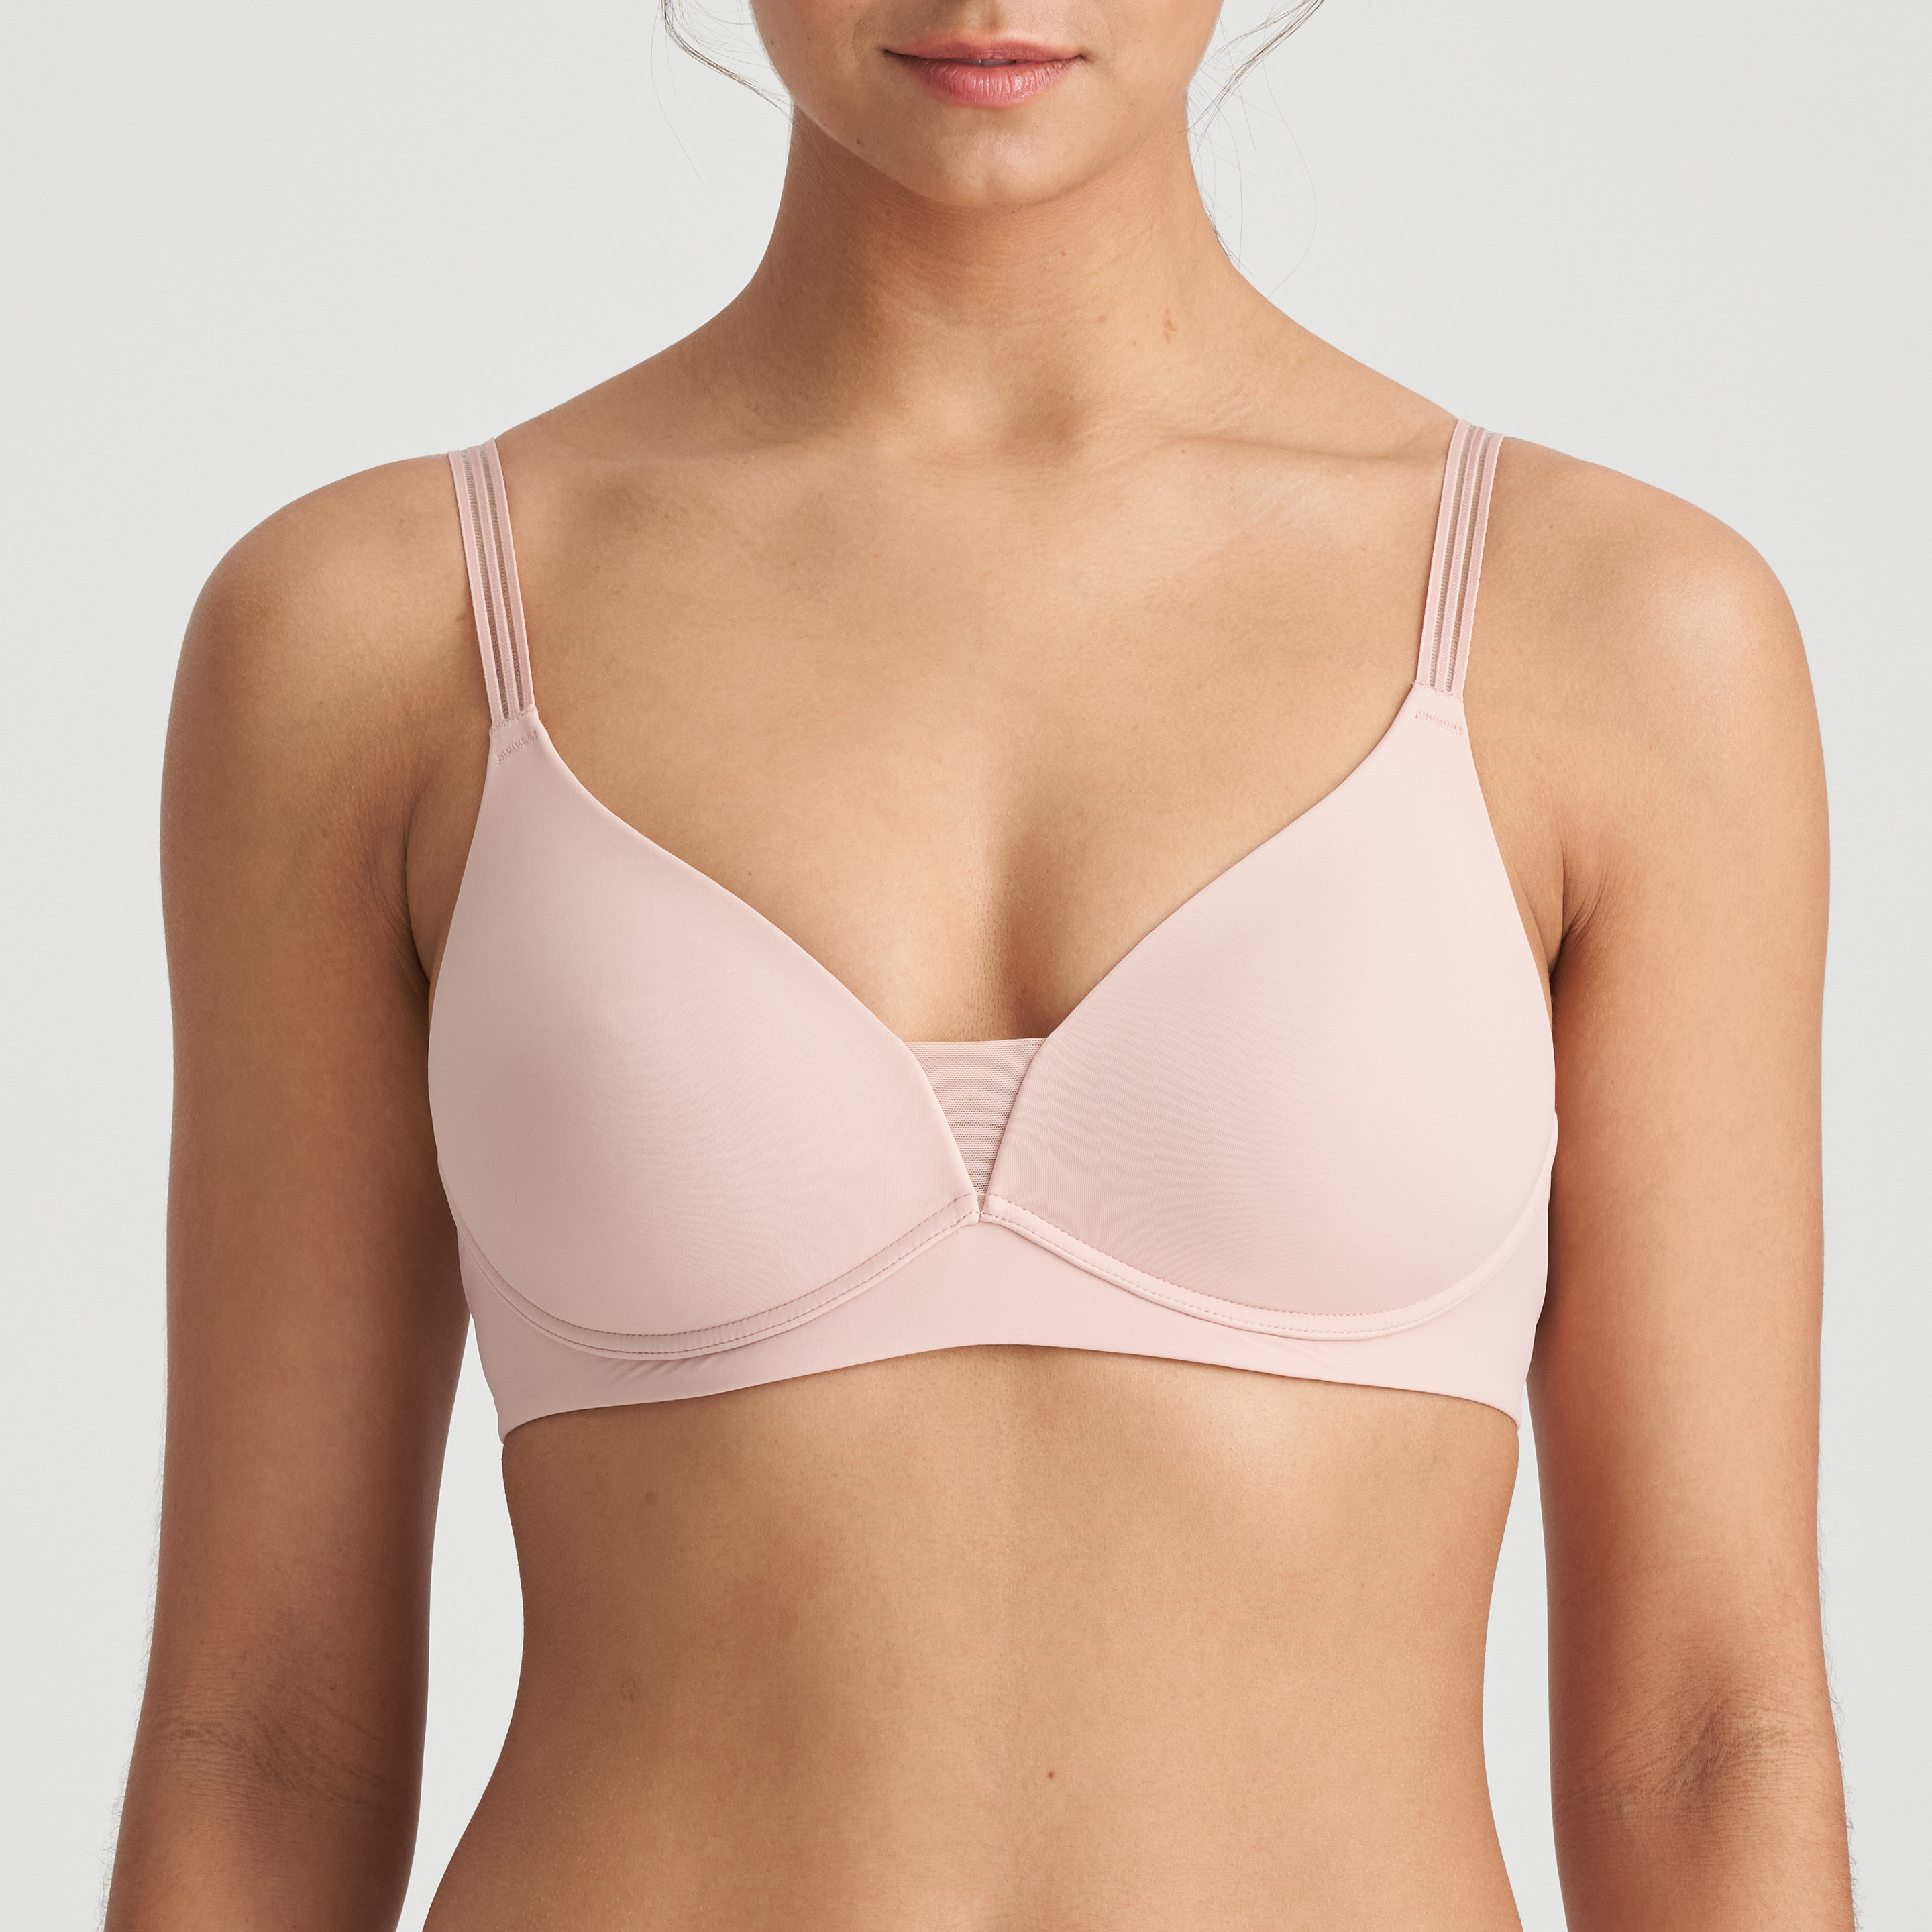 AiLan Fashion Women's Seamless Full Cup No Padded Underwire